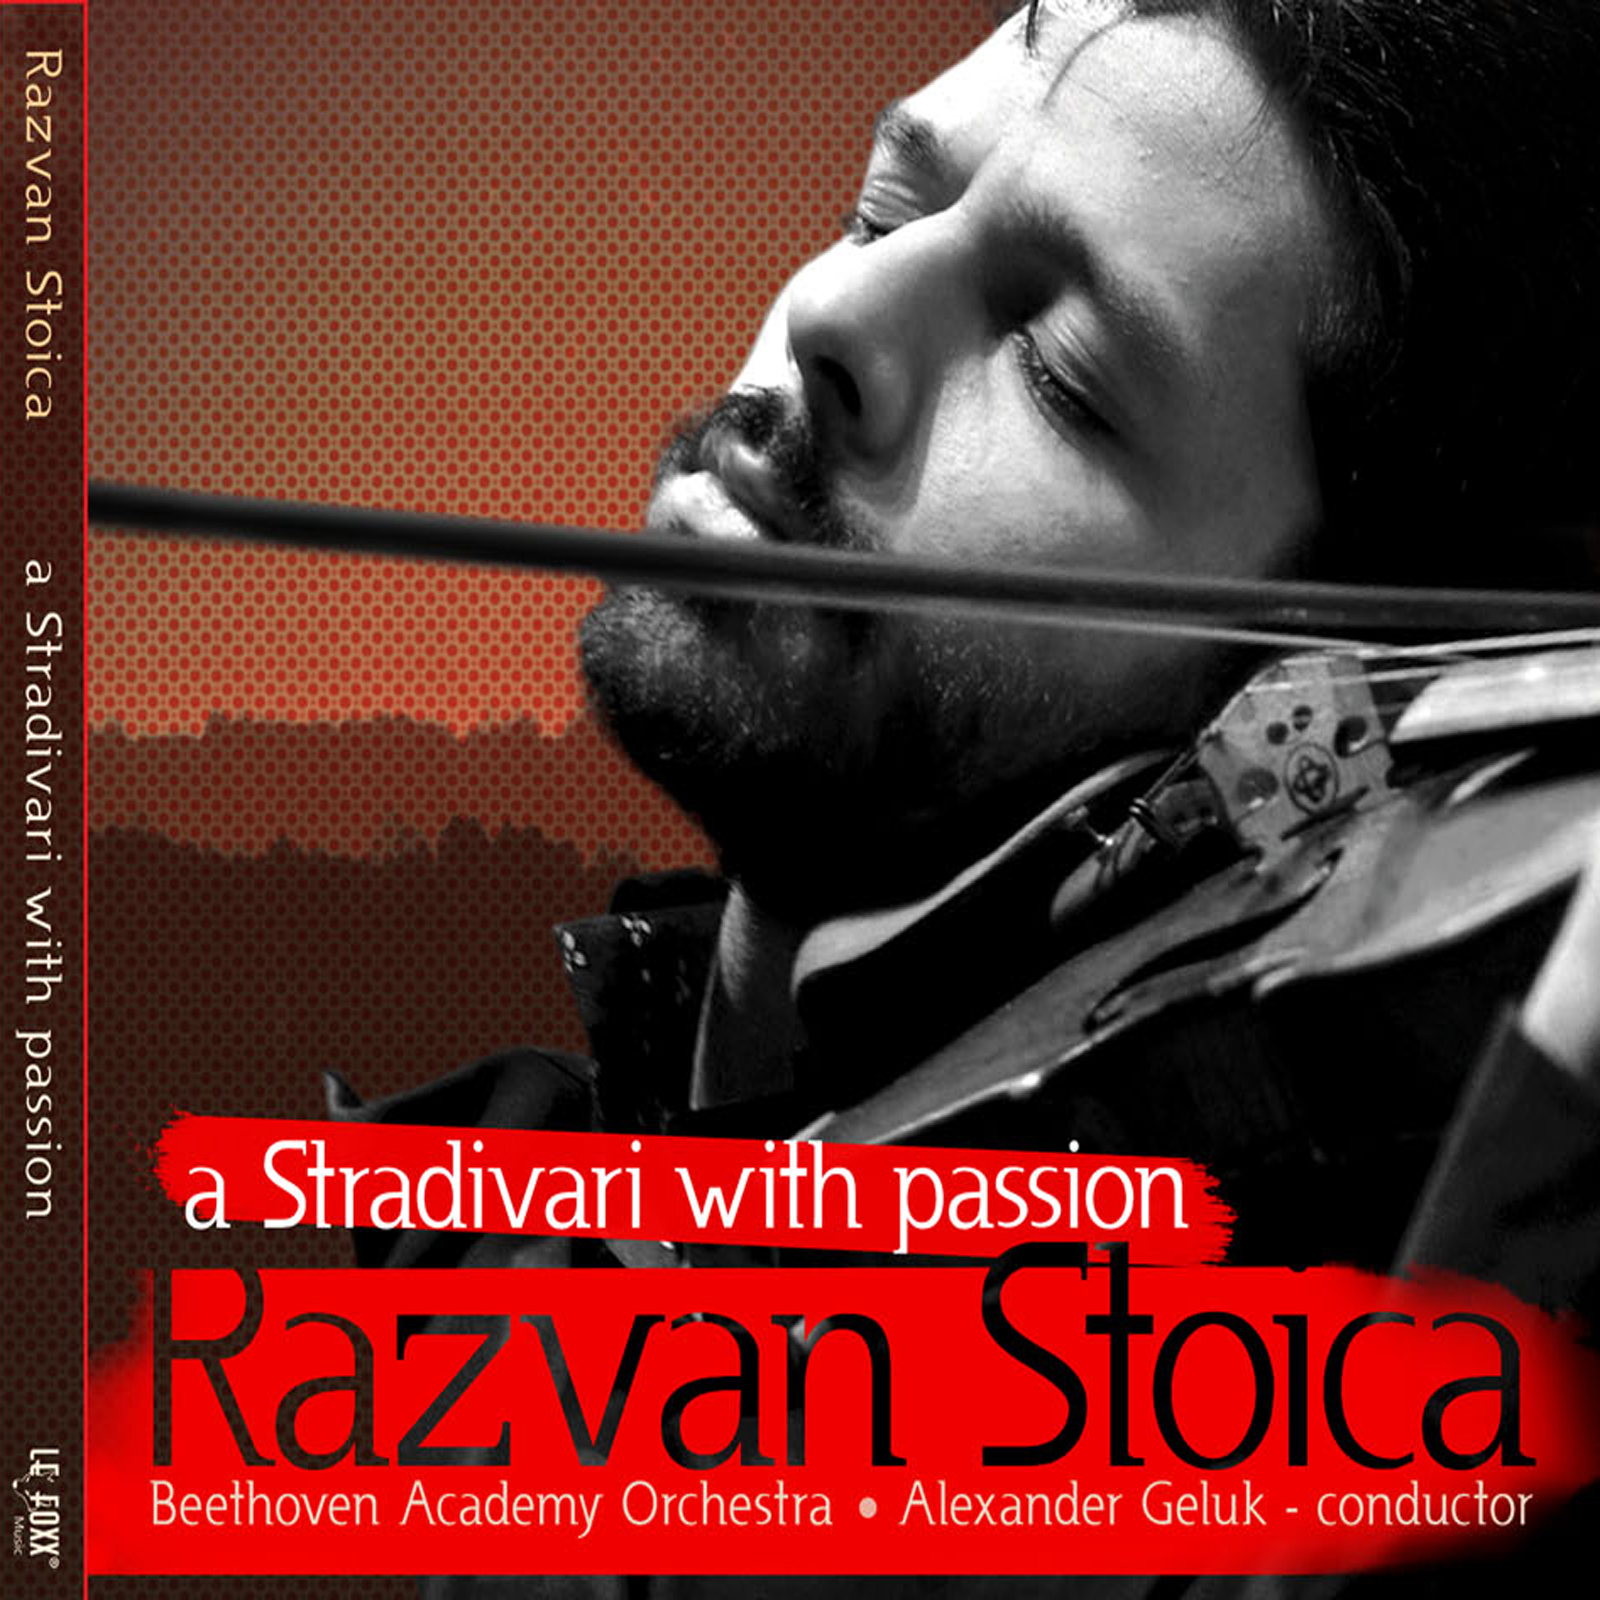 “The Stradivari with Passion” Beethoven Academy Orchestra, (2010)